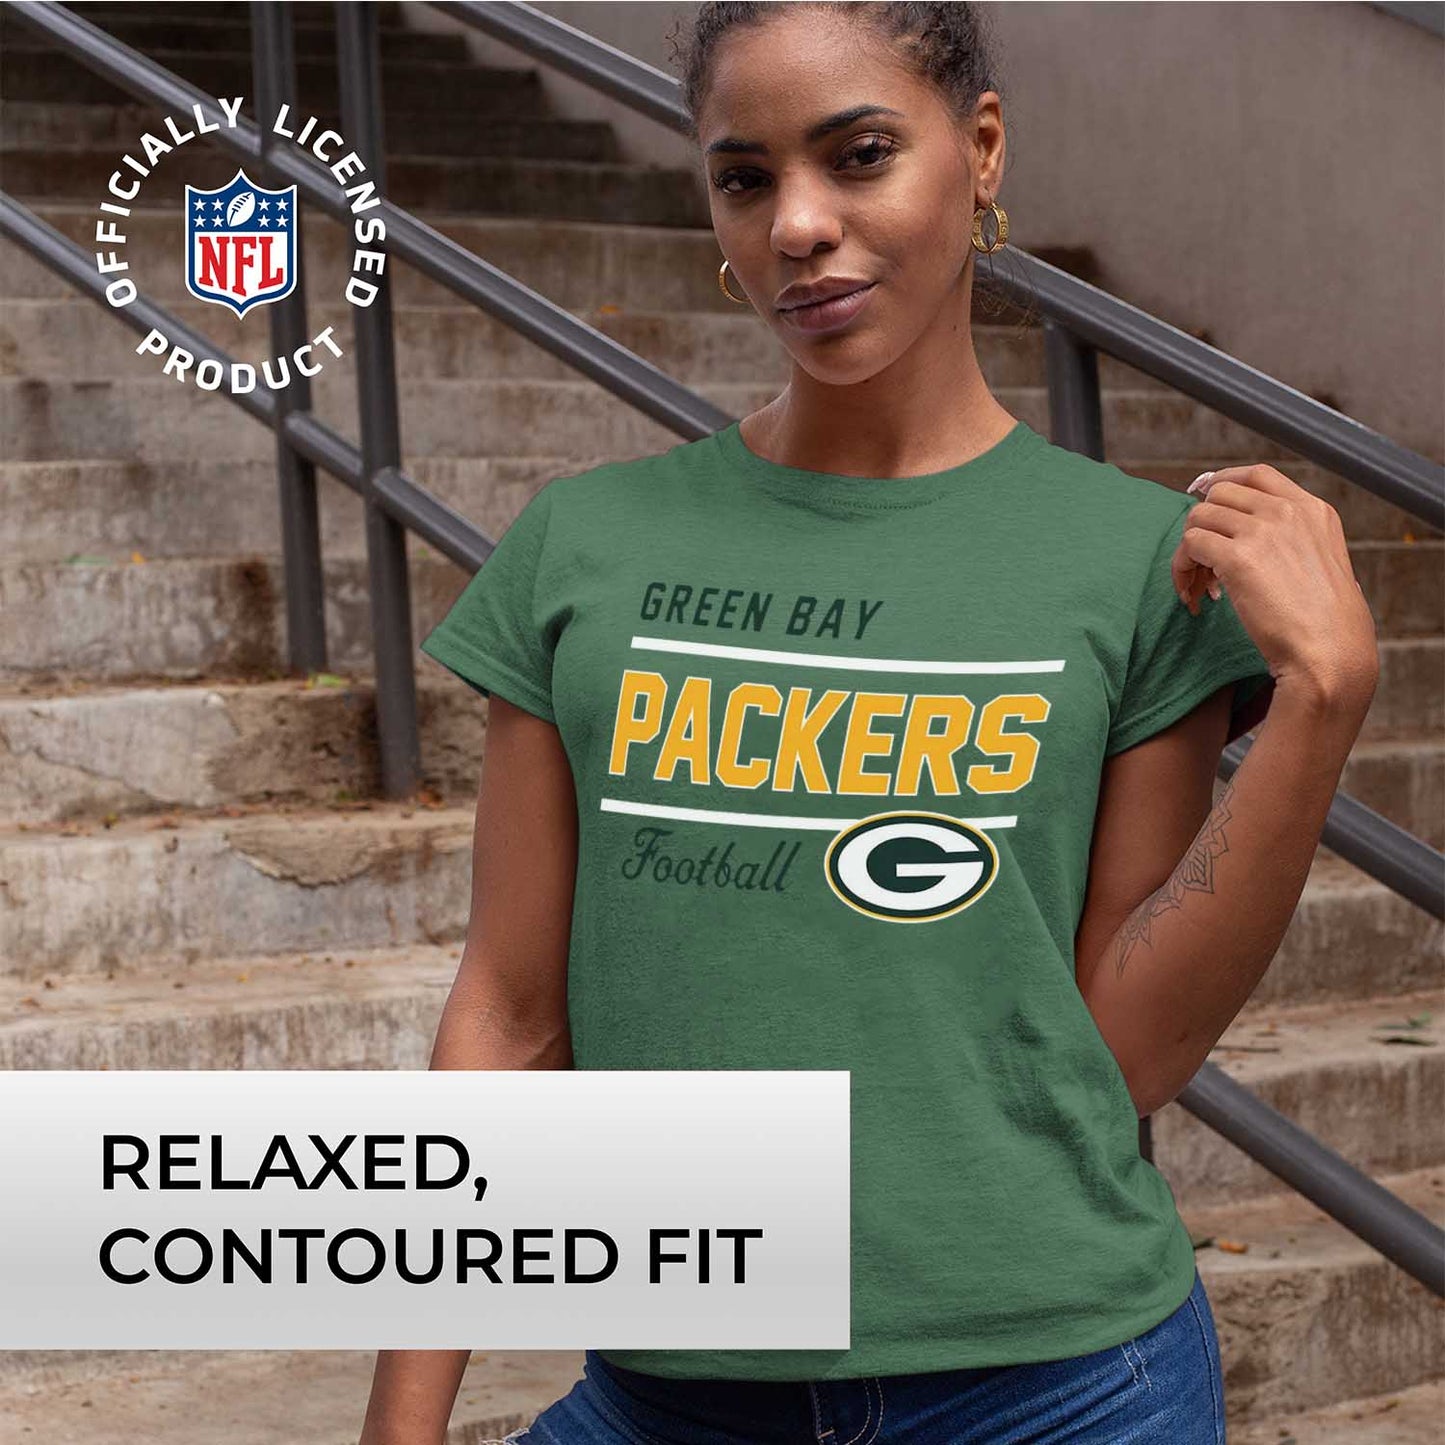 Green Bay Packers NFL Womens Relaxed Fit Tshirt - Green